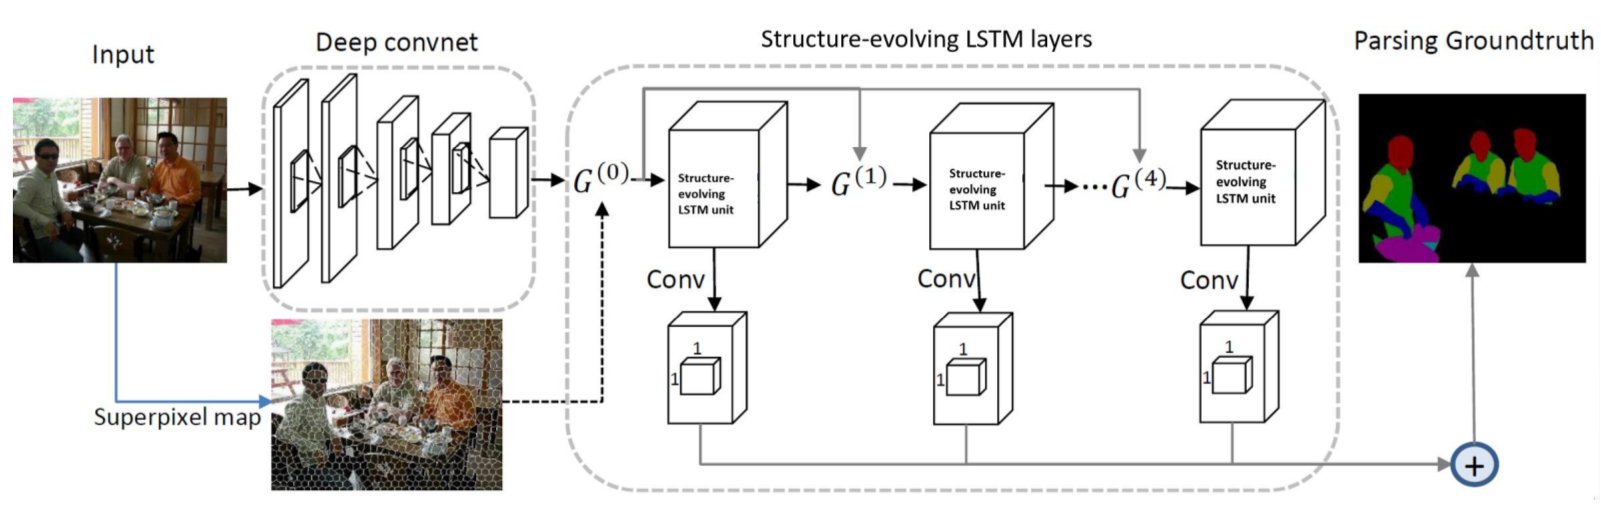 structure-evolving LSTM